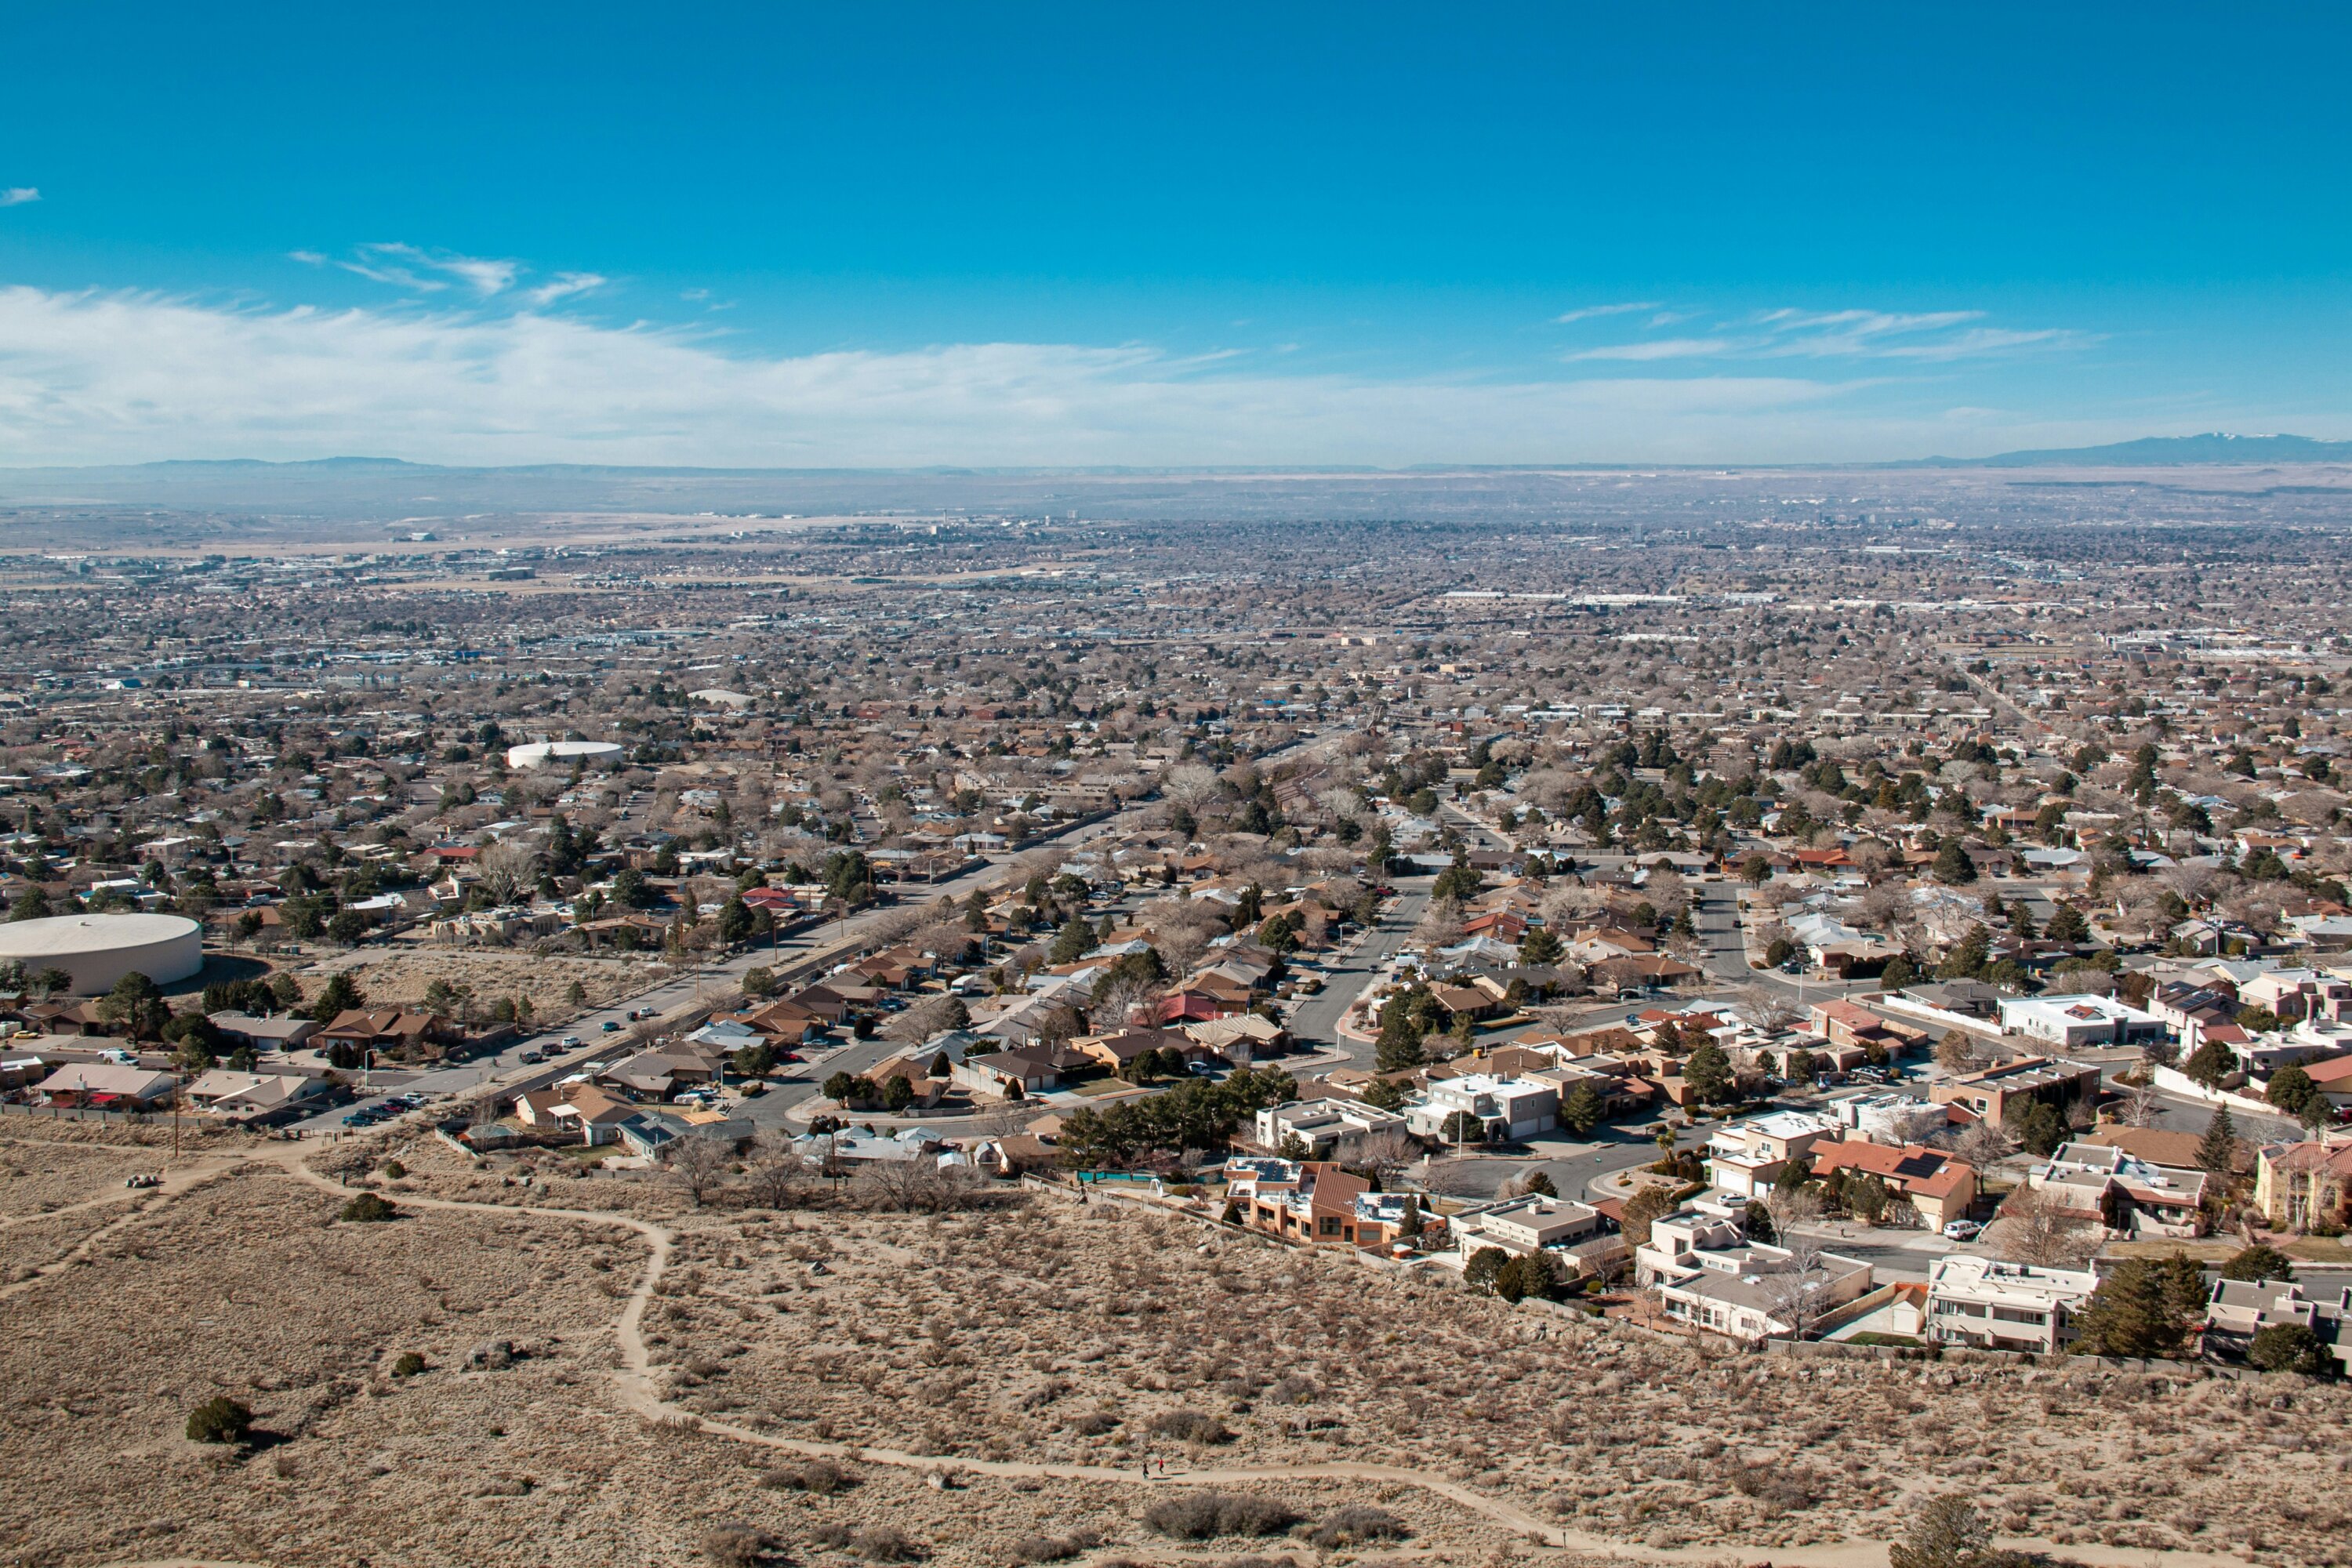 Aerial view of Albuquerque city during daytime